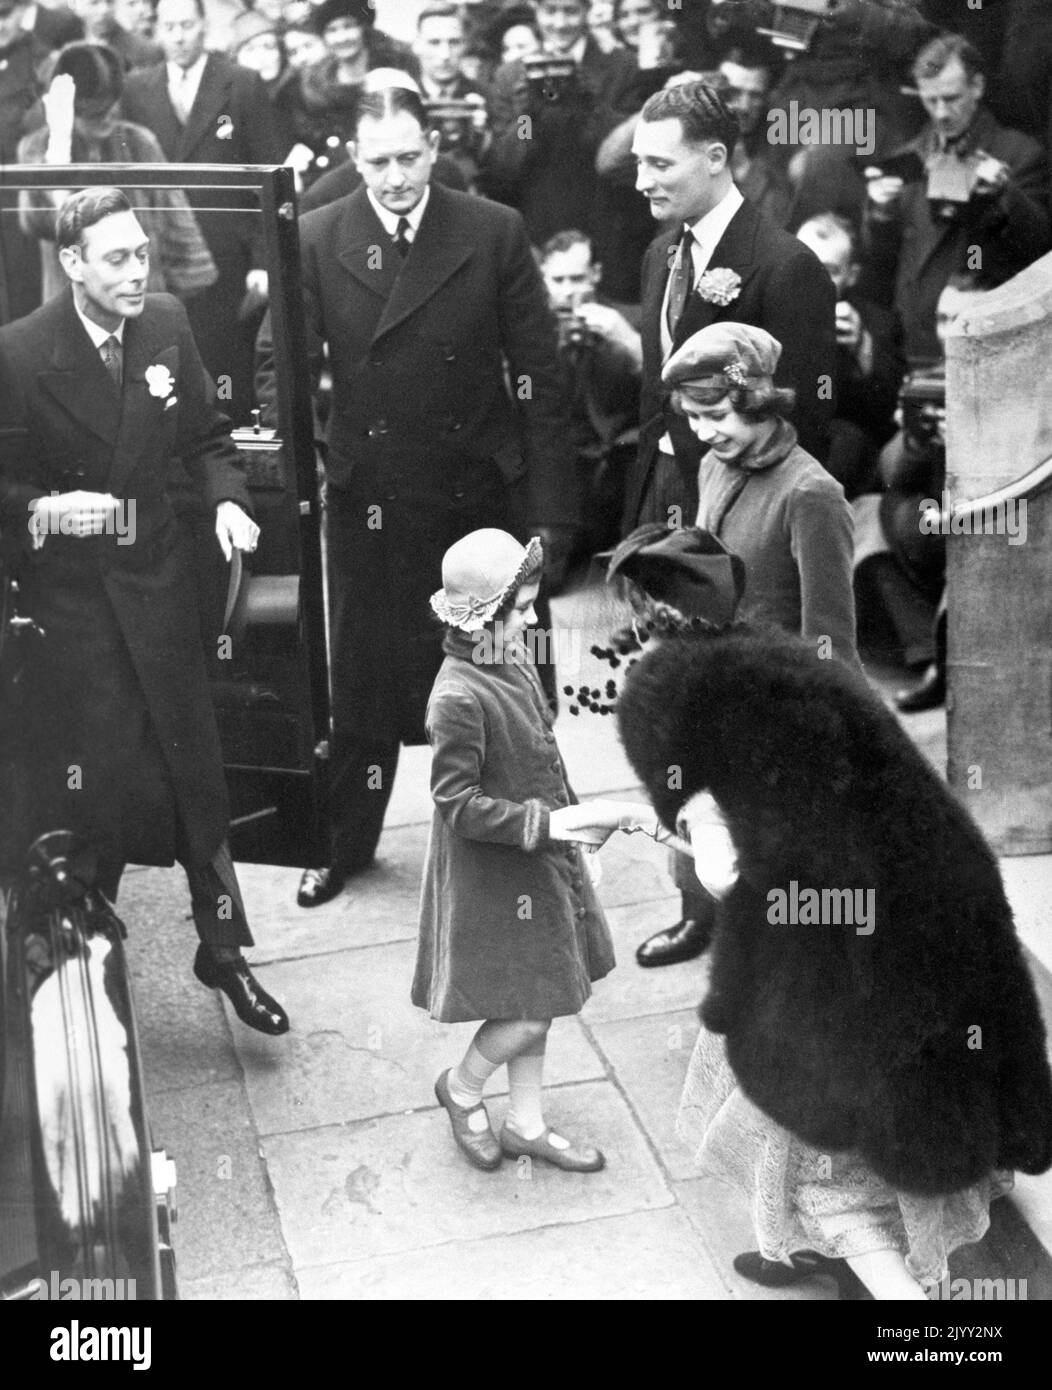 File photo dated March 1939 of Princess Elizabeth (far right) arriving with her father, King George V (stepping from car), and sister, Princess Margaret, for the wedding of the Hon. Cecilia Bowes Lyon, niece of the Queen, to Kenneth Harrington at Holy Trinity in Brompton. The romance of Prince Philip of Greece and Princess Elizabeth sprang out of a summer encounter at the Royal Naval College in Dartmouth in the year of 1939. Philip, who was just 18, was introduced to 13-year-old Elizabeth at the house of the captain of the college, later Admiral Sir Frederick Dalrymple-Hamilton. Issue date: Th Stock Photo